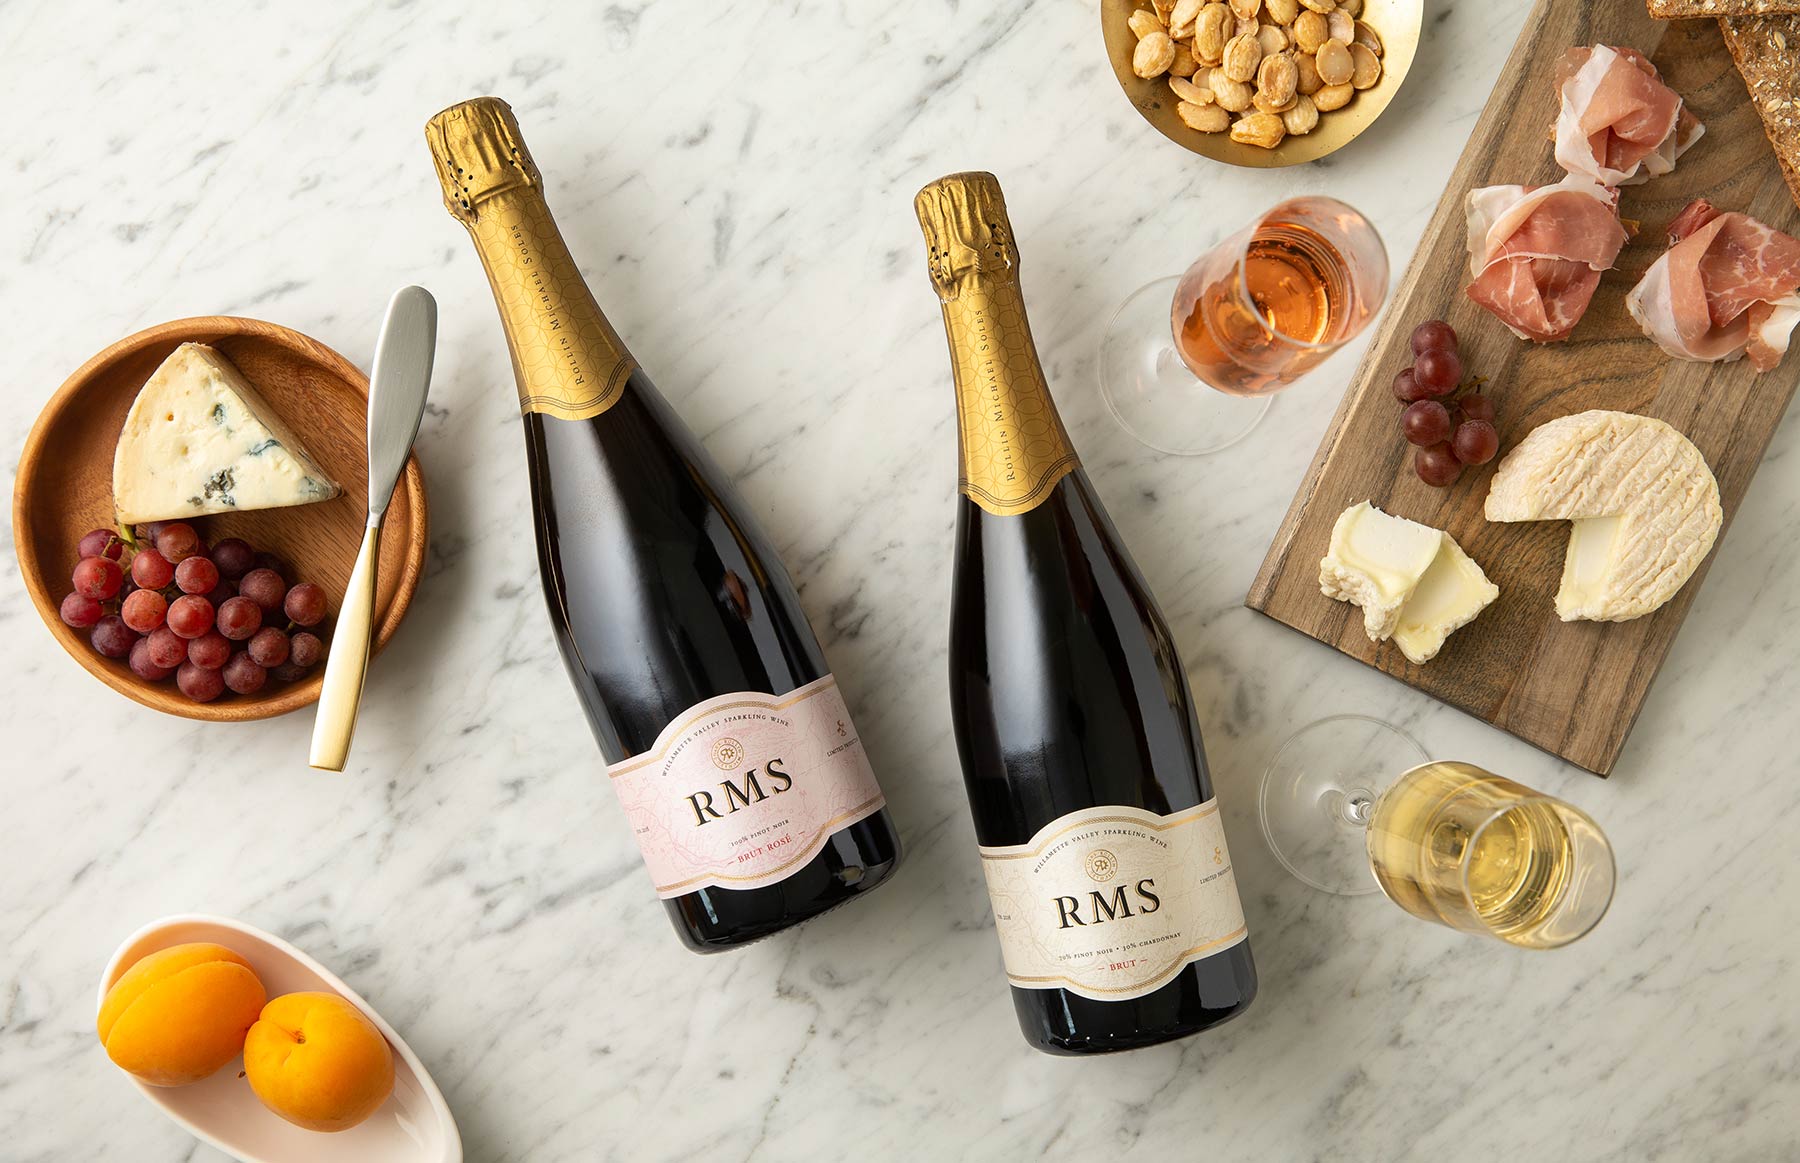 Two bottles of ROCO Sparkling wine with food.